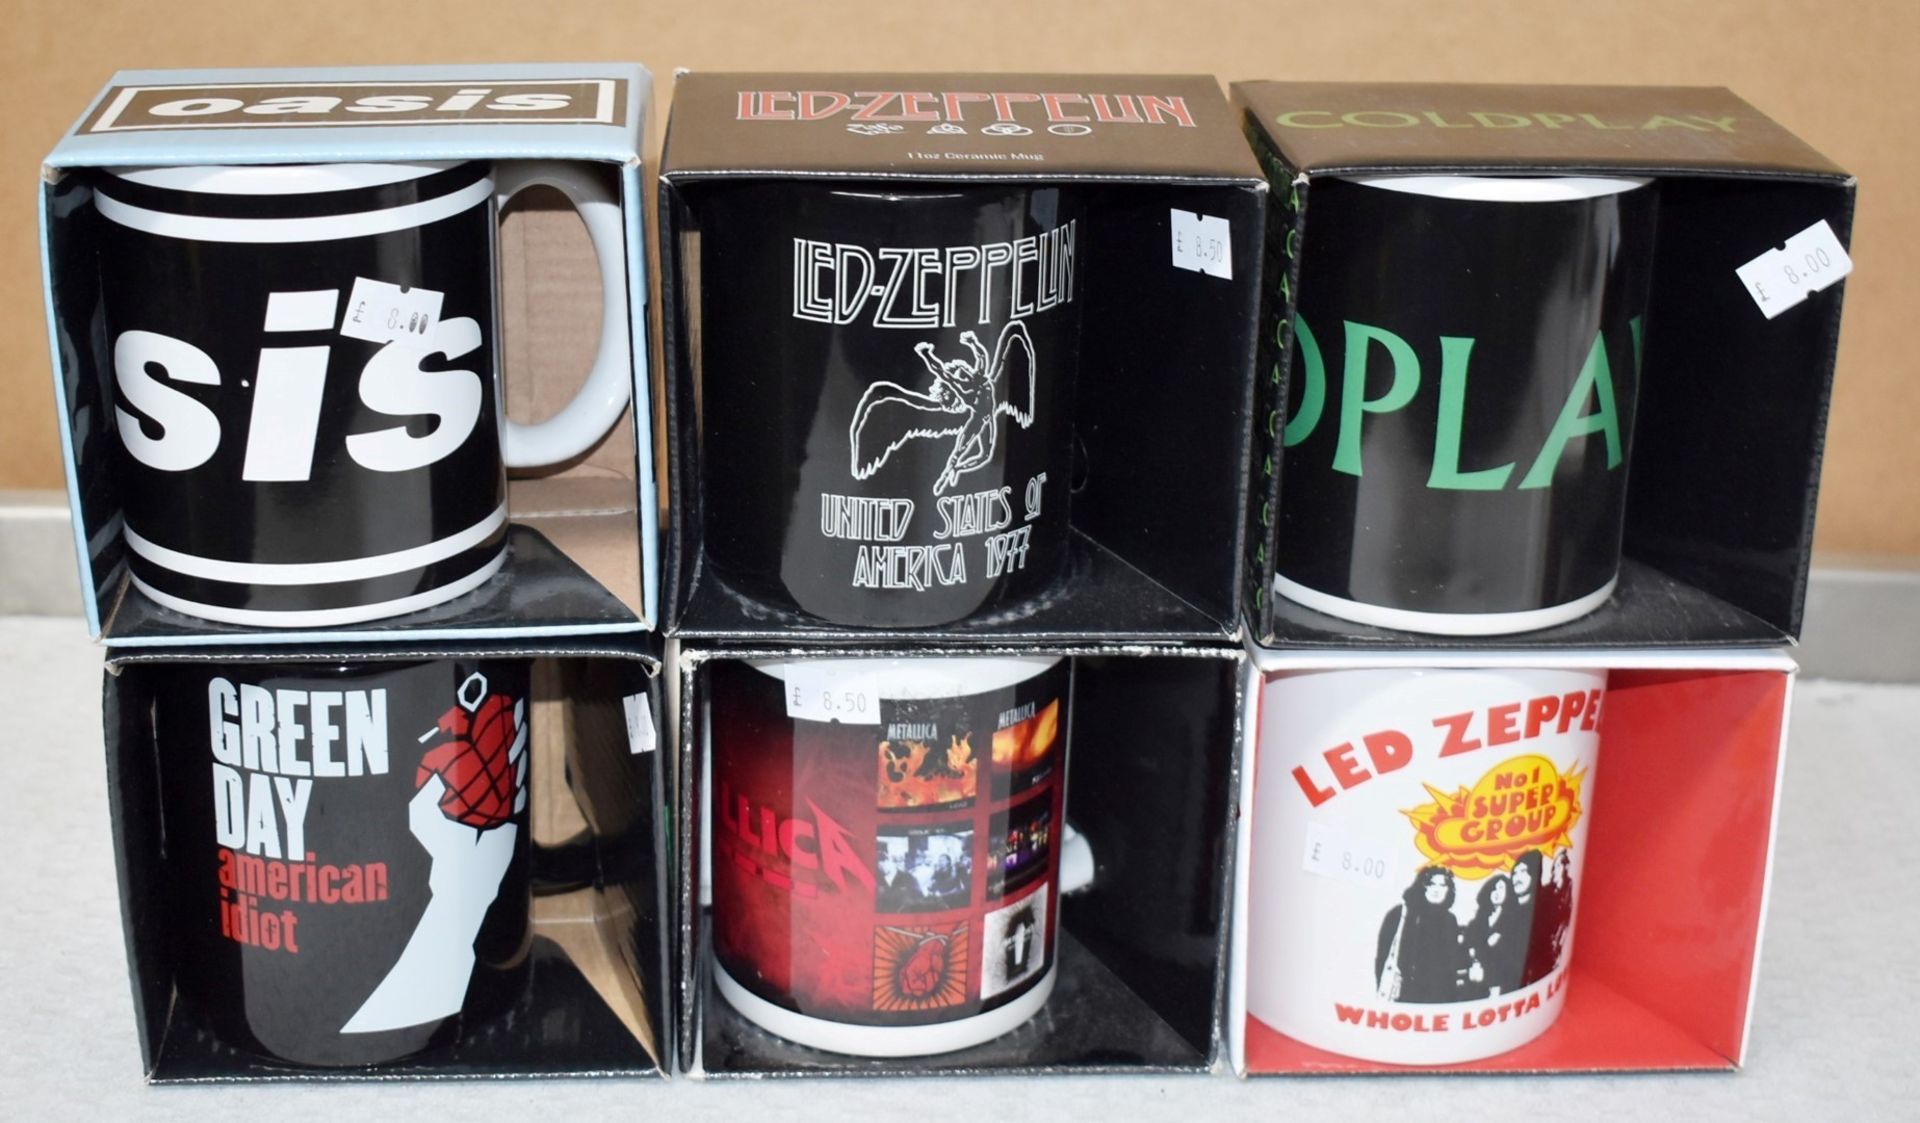 6 x Assorted Rock n Roll Themed Band Drinking Mugs - Includes Green Day, Oasis, Coldplay, Led